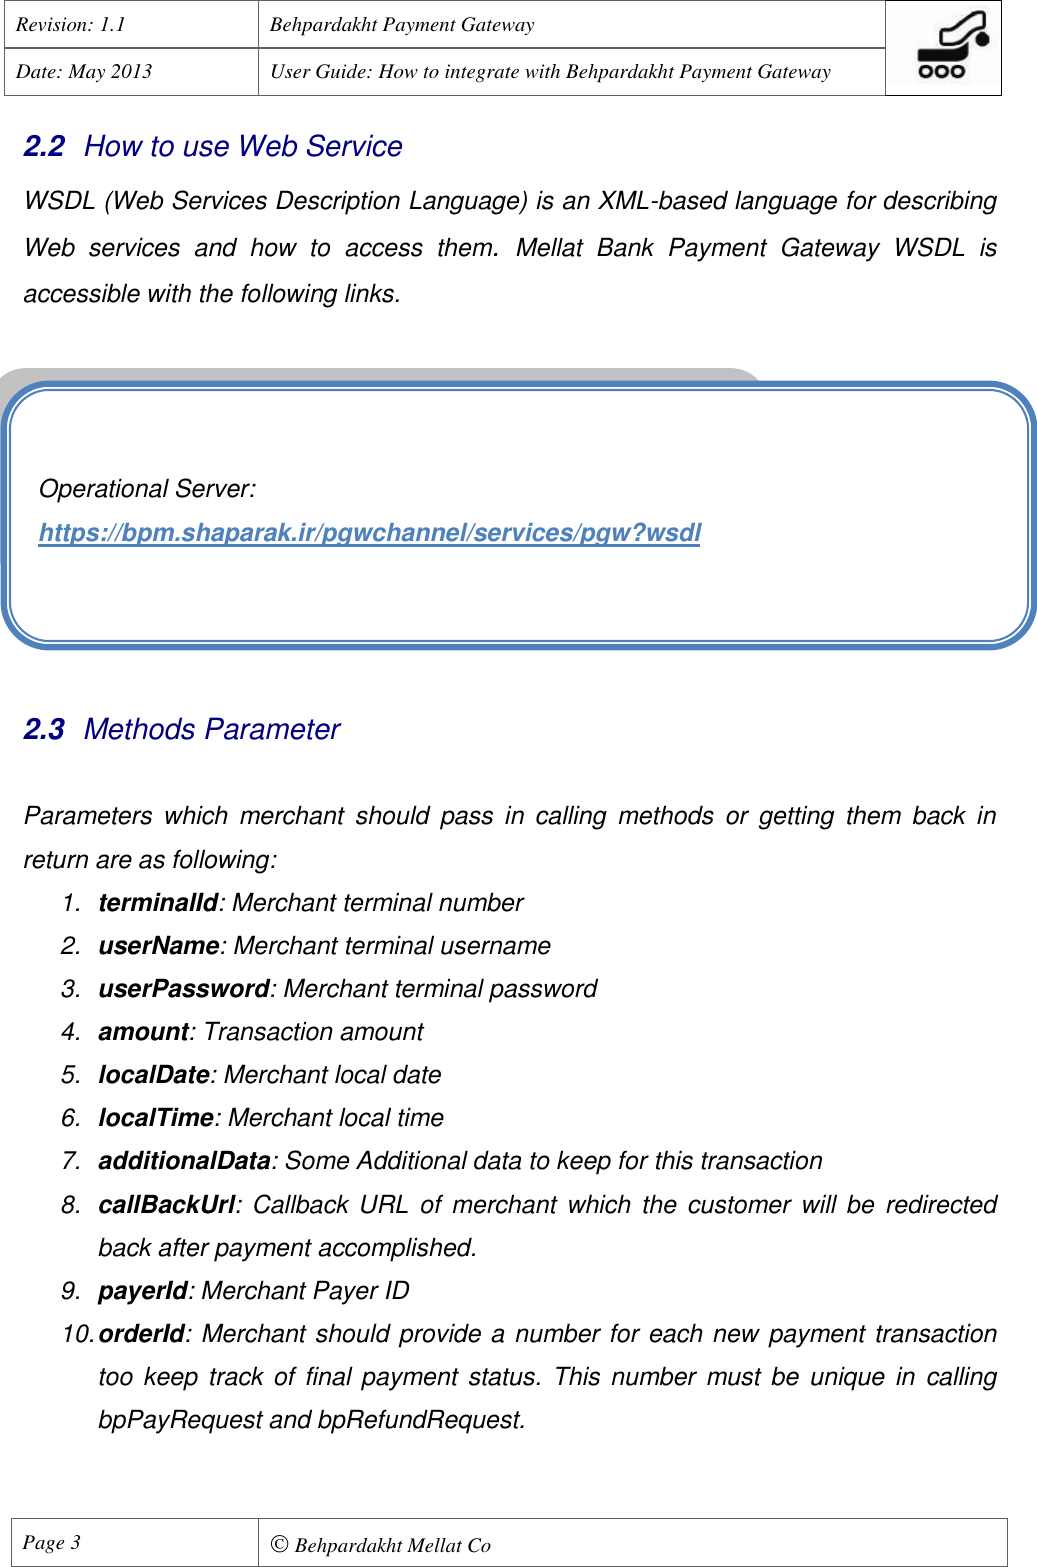 Page 4 of 11 - Behpardakht Mellat - Payment Gateway PGW User Manual English Ver 1.1